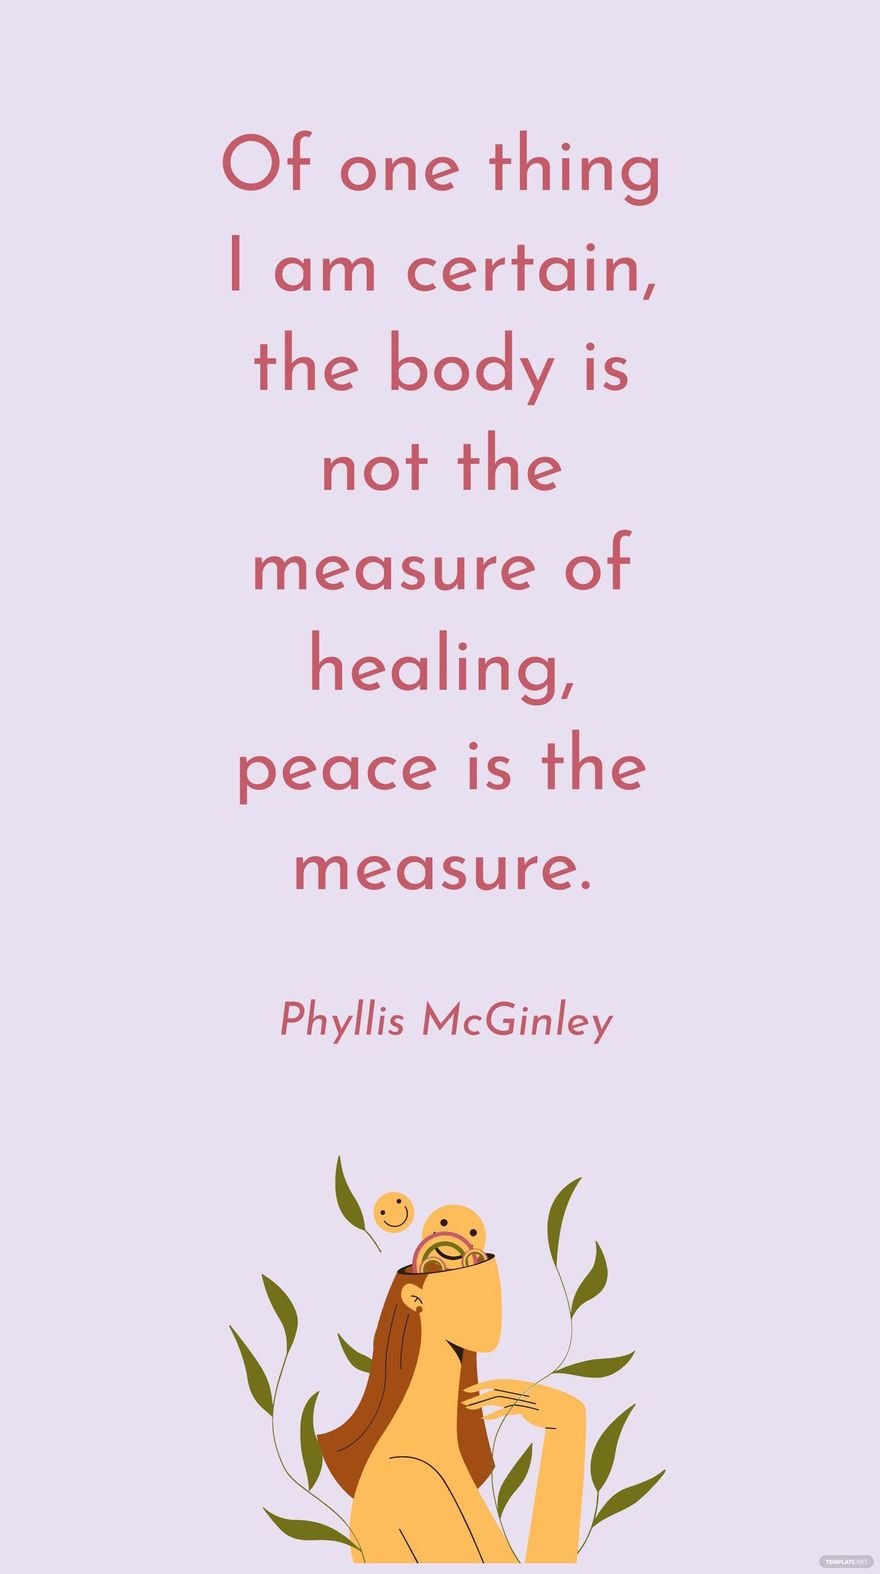 Phyllis McGinley - Of one thing I am certain, the body is not the measure of healing, peace is the measure.